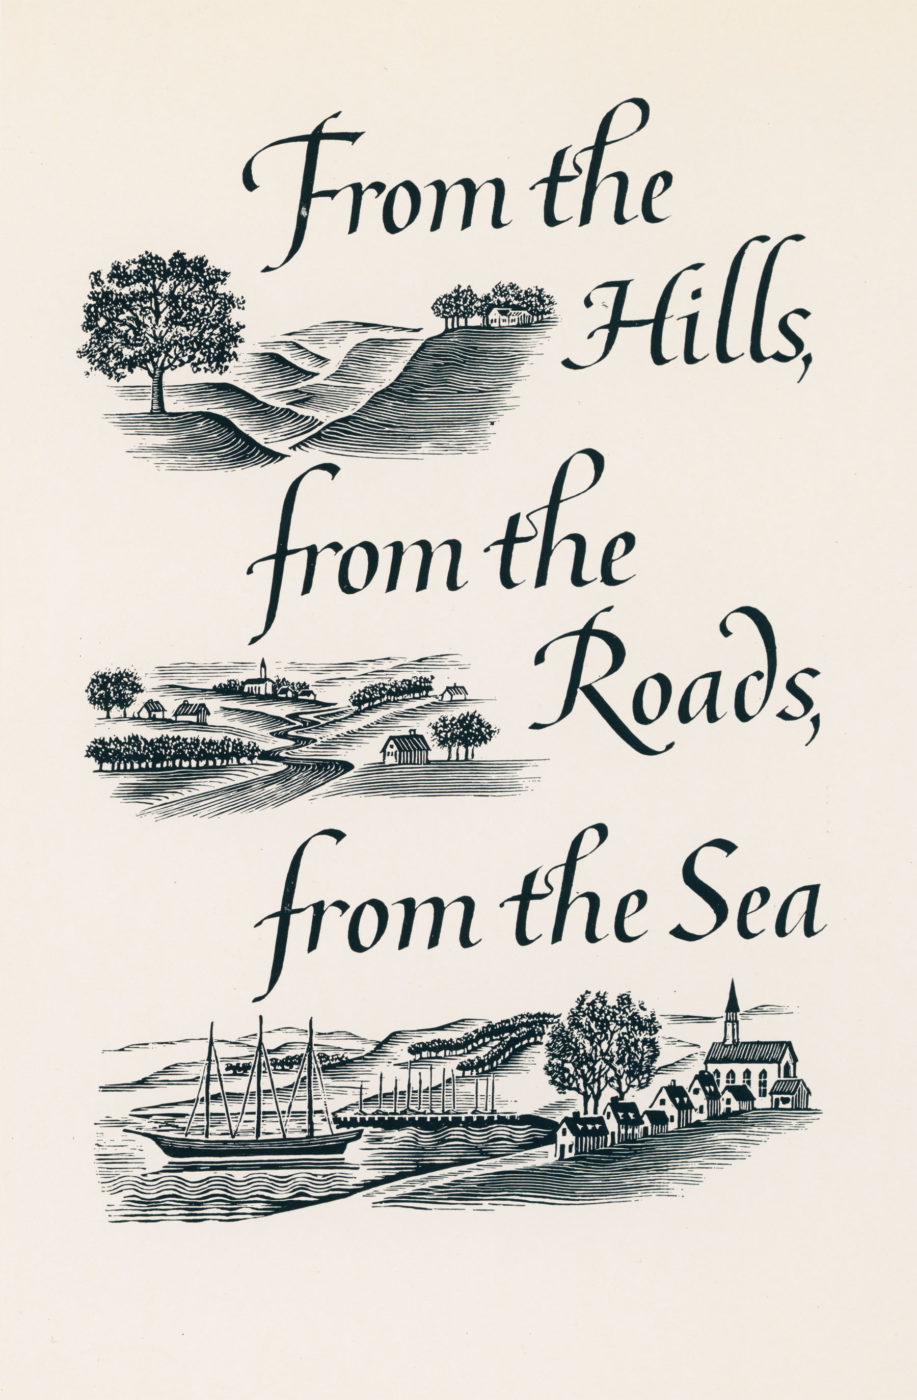 100 Poems About People: From the Hills, from the Roads, from the Sea